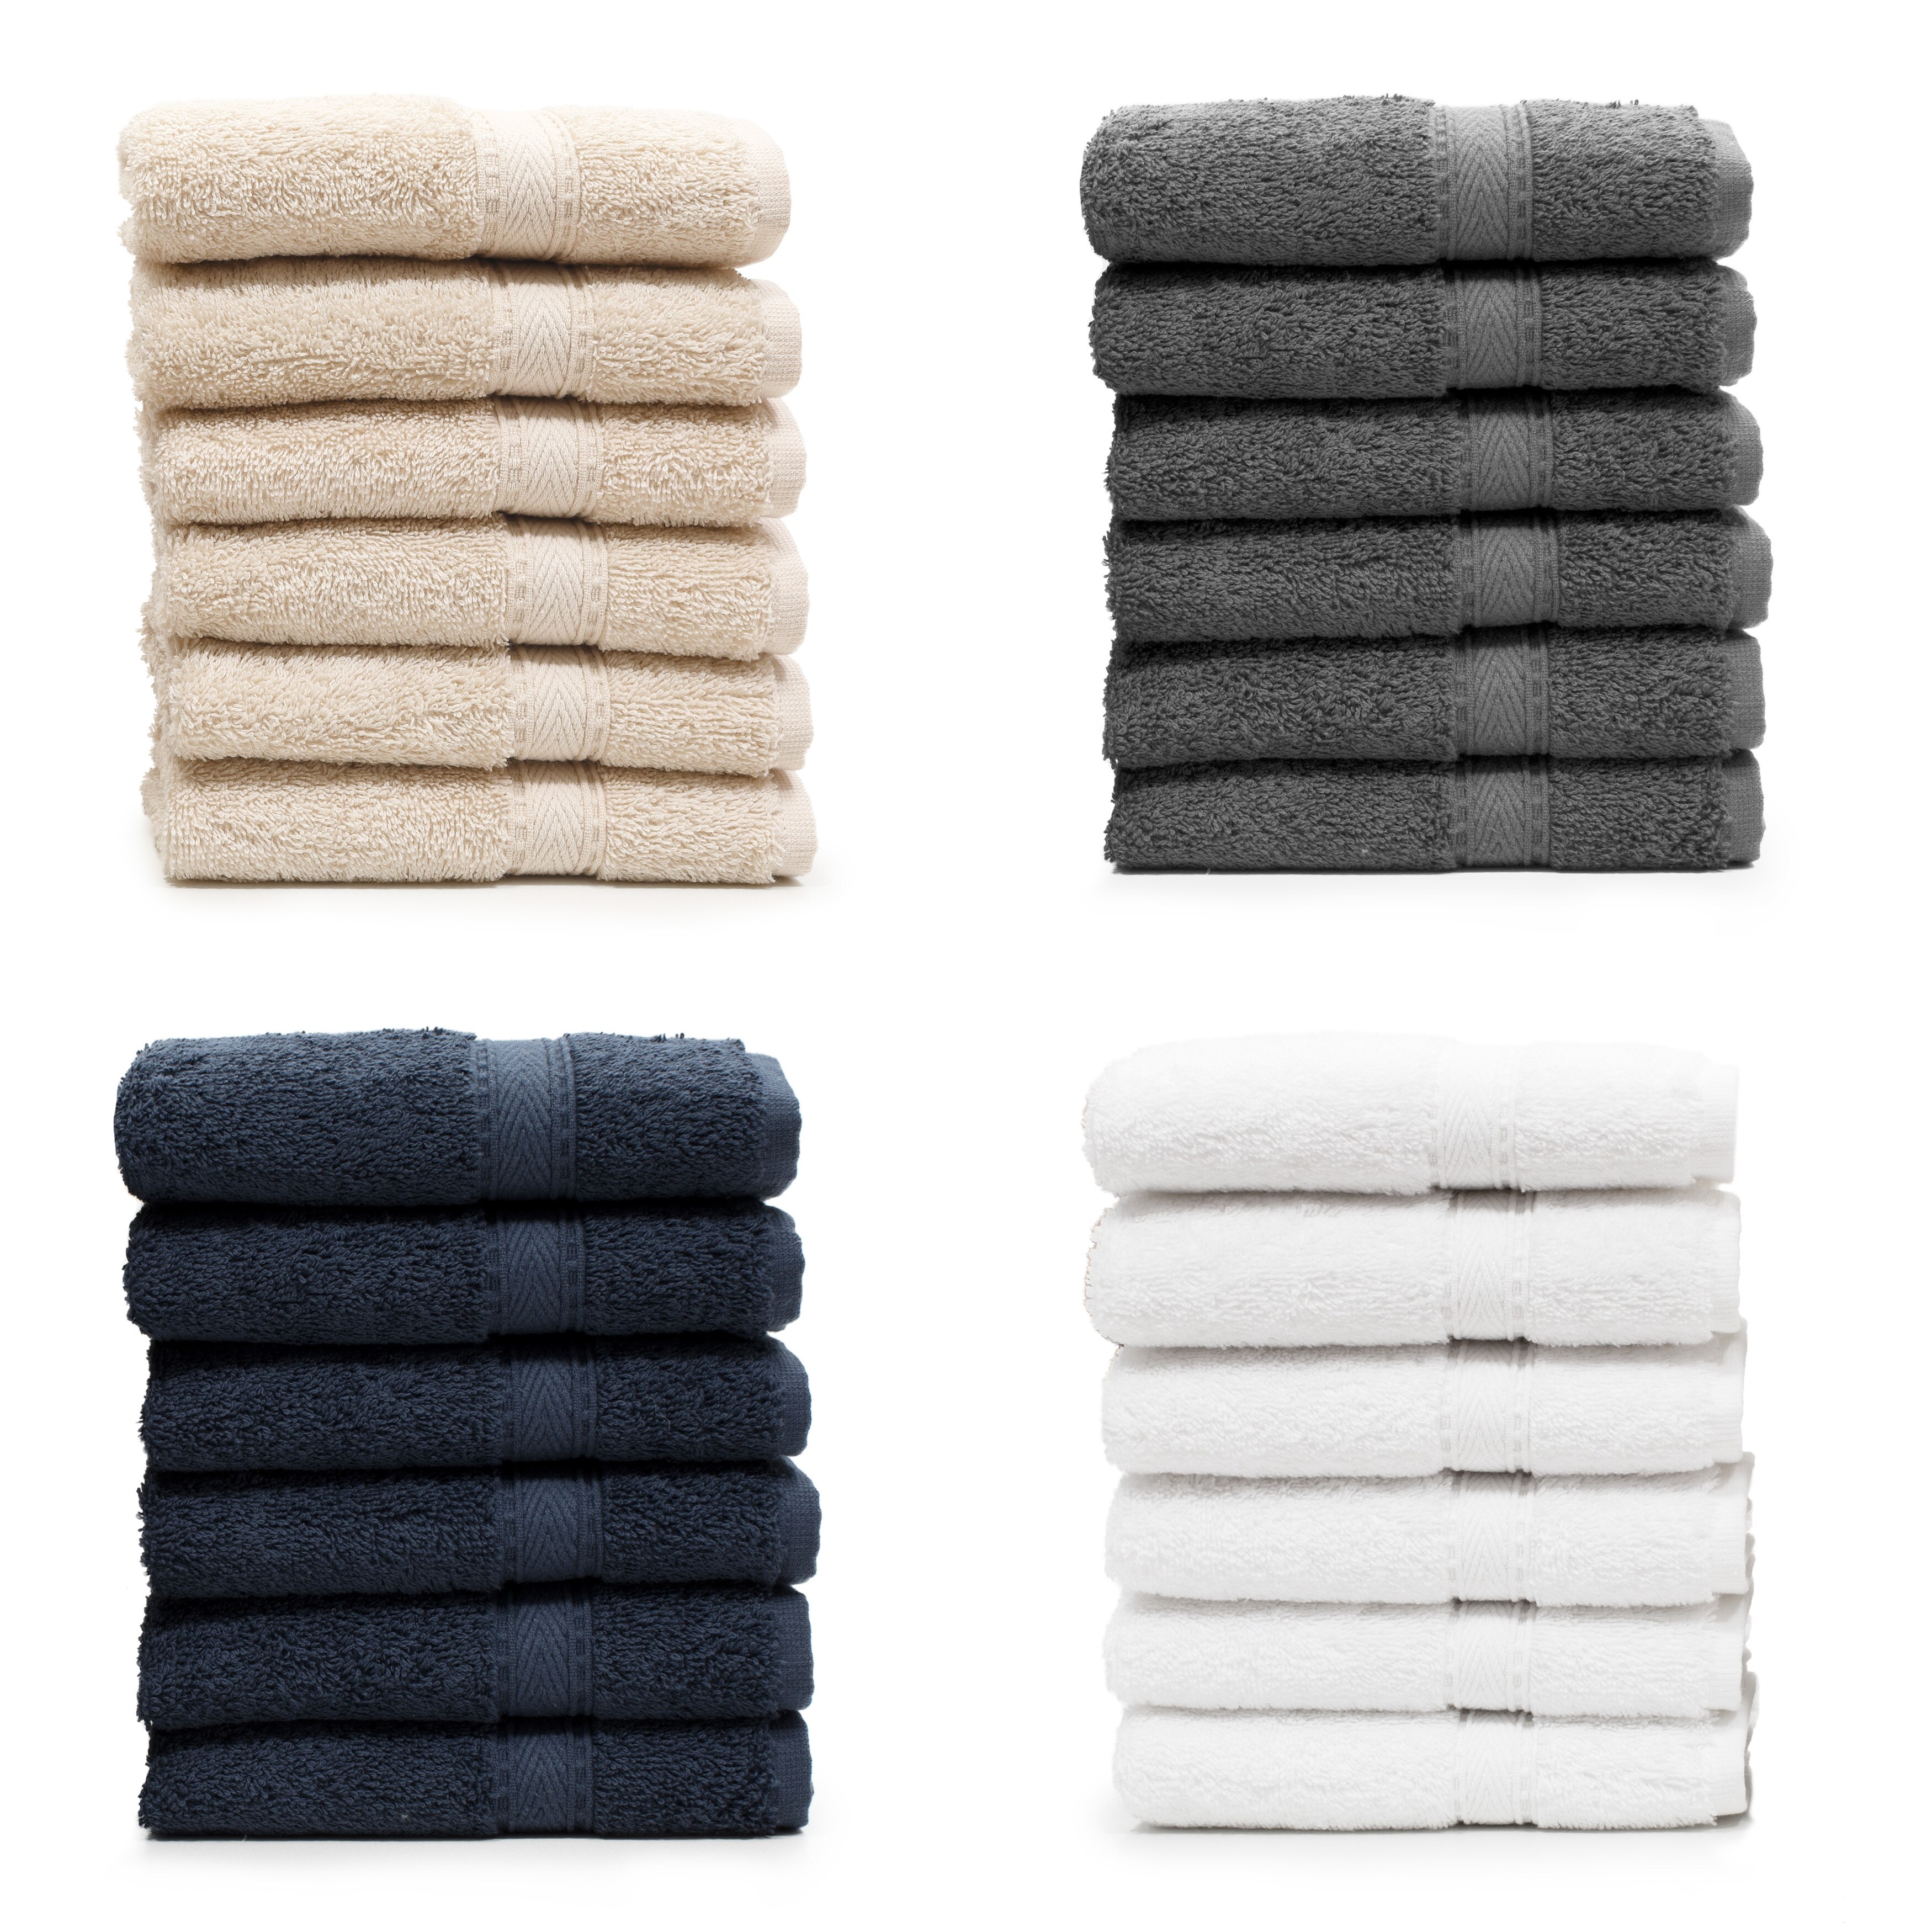 https://ak1.ostkcdn.com/images/products/is/images/direct/b3437859e7a41a92ac3e20916d5ad1641a4626fc/Authentic-Hotel-Spa-Turkish-Cotton-Washcloth-%28Set-of-6%29.jpg